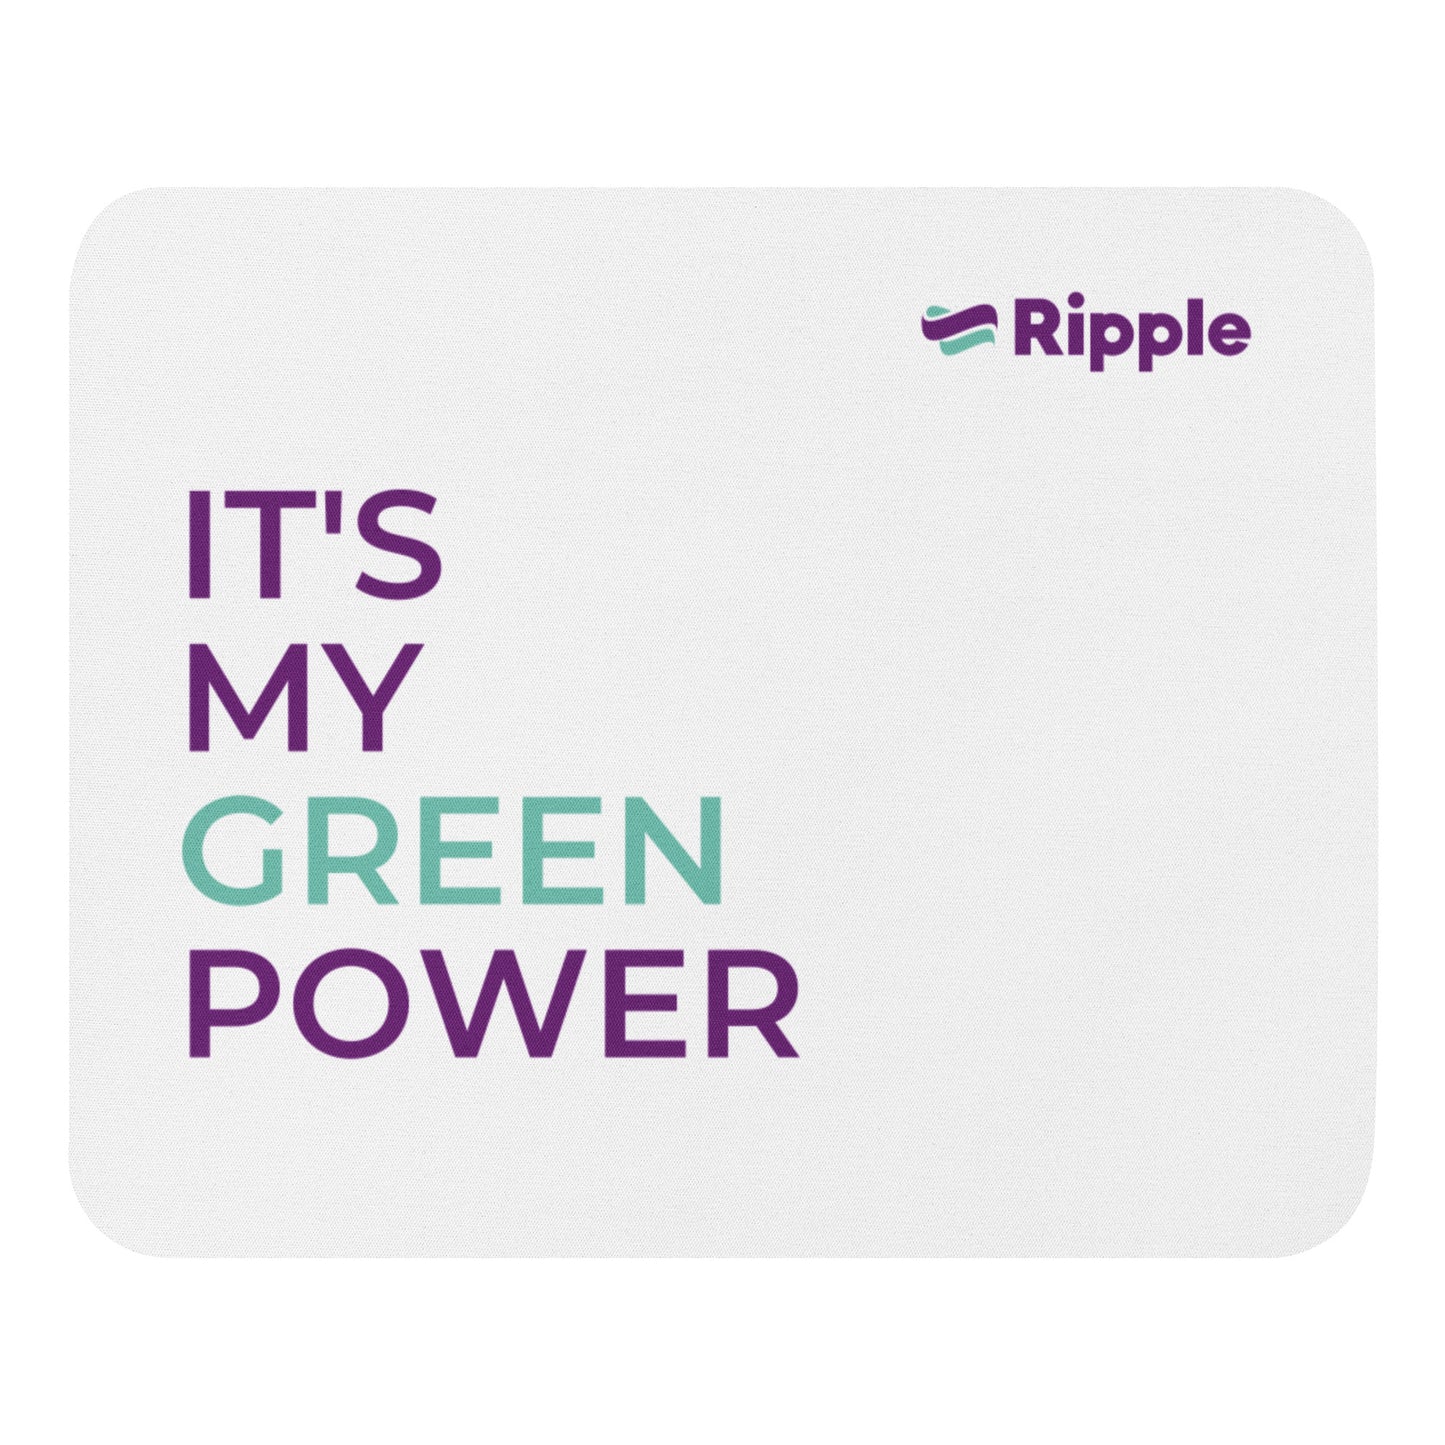 'It's my green power' mouse pad